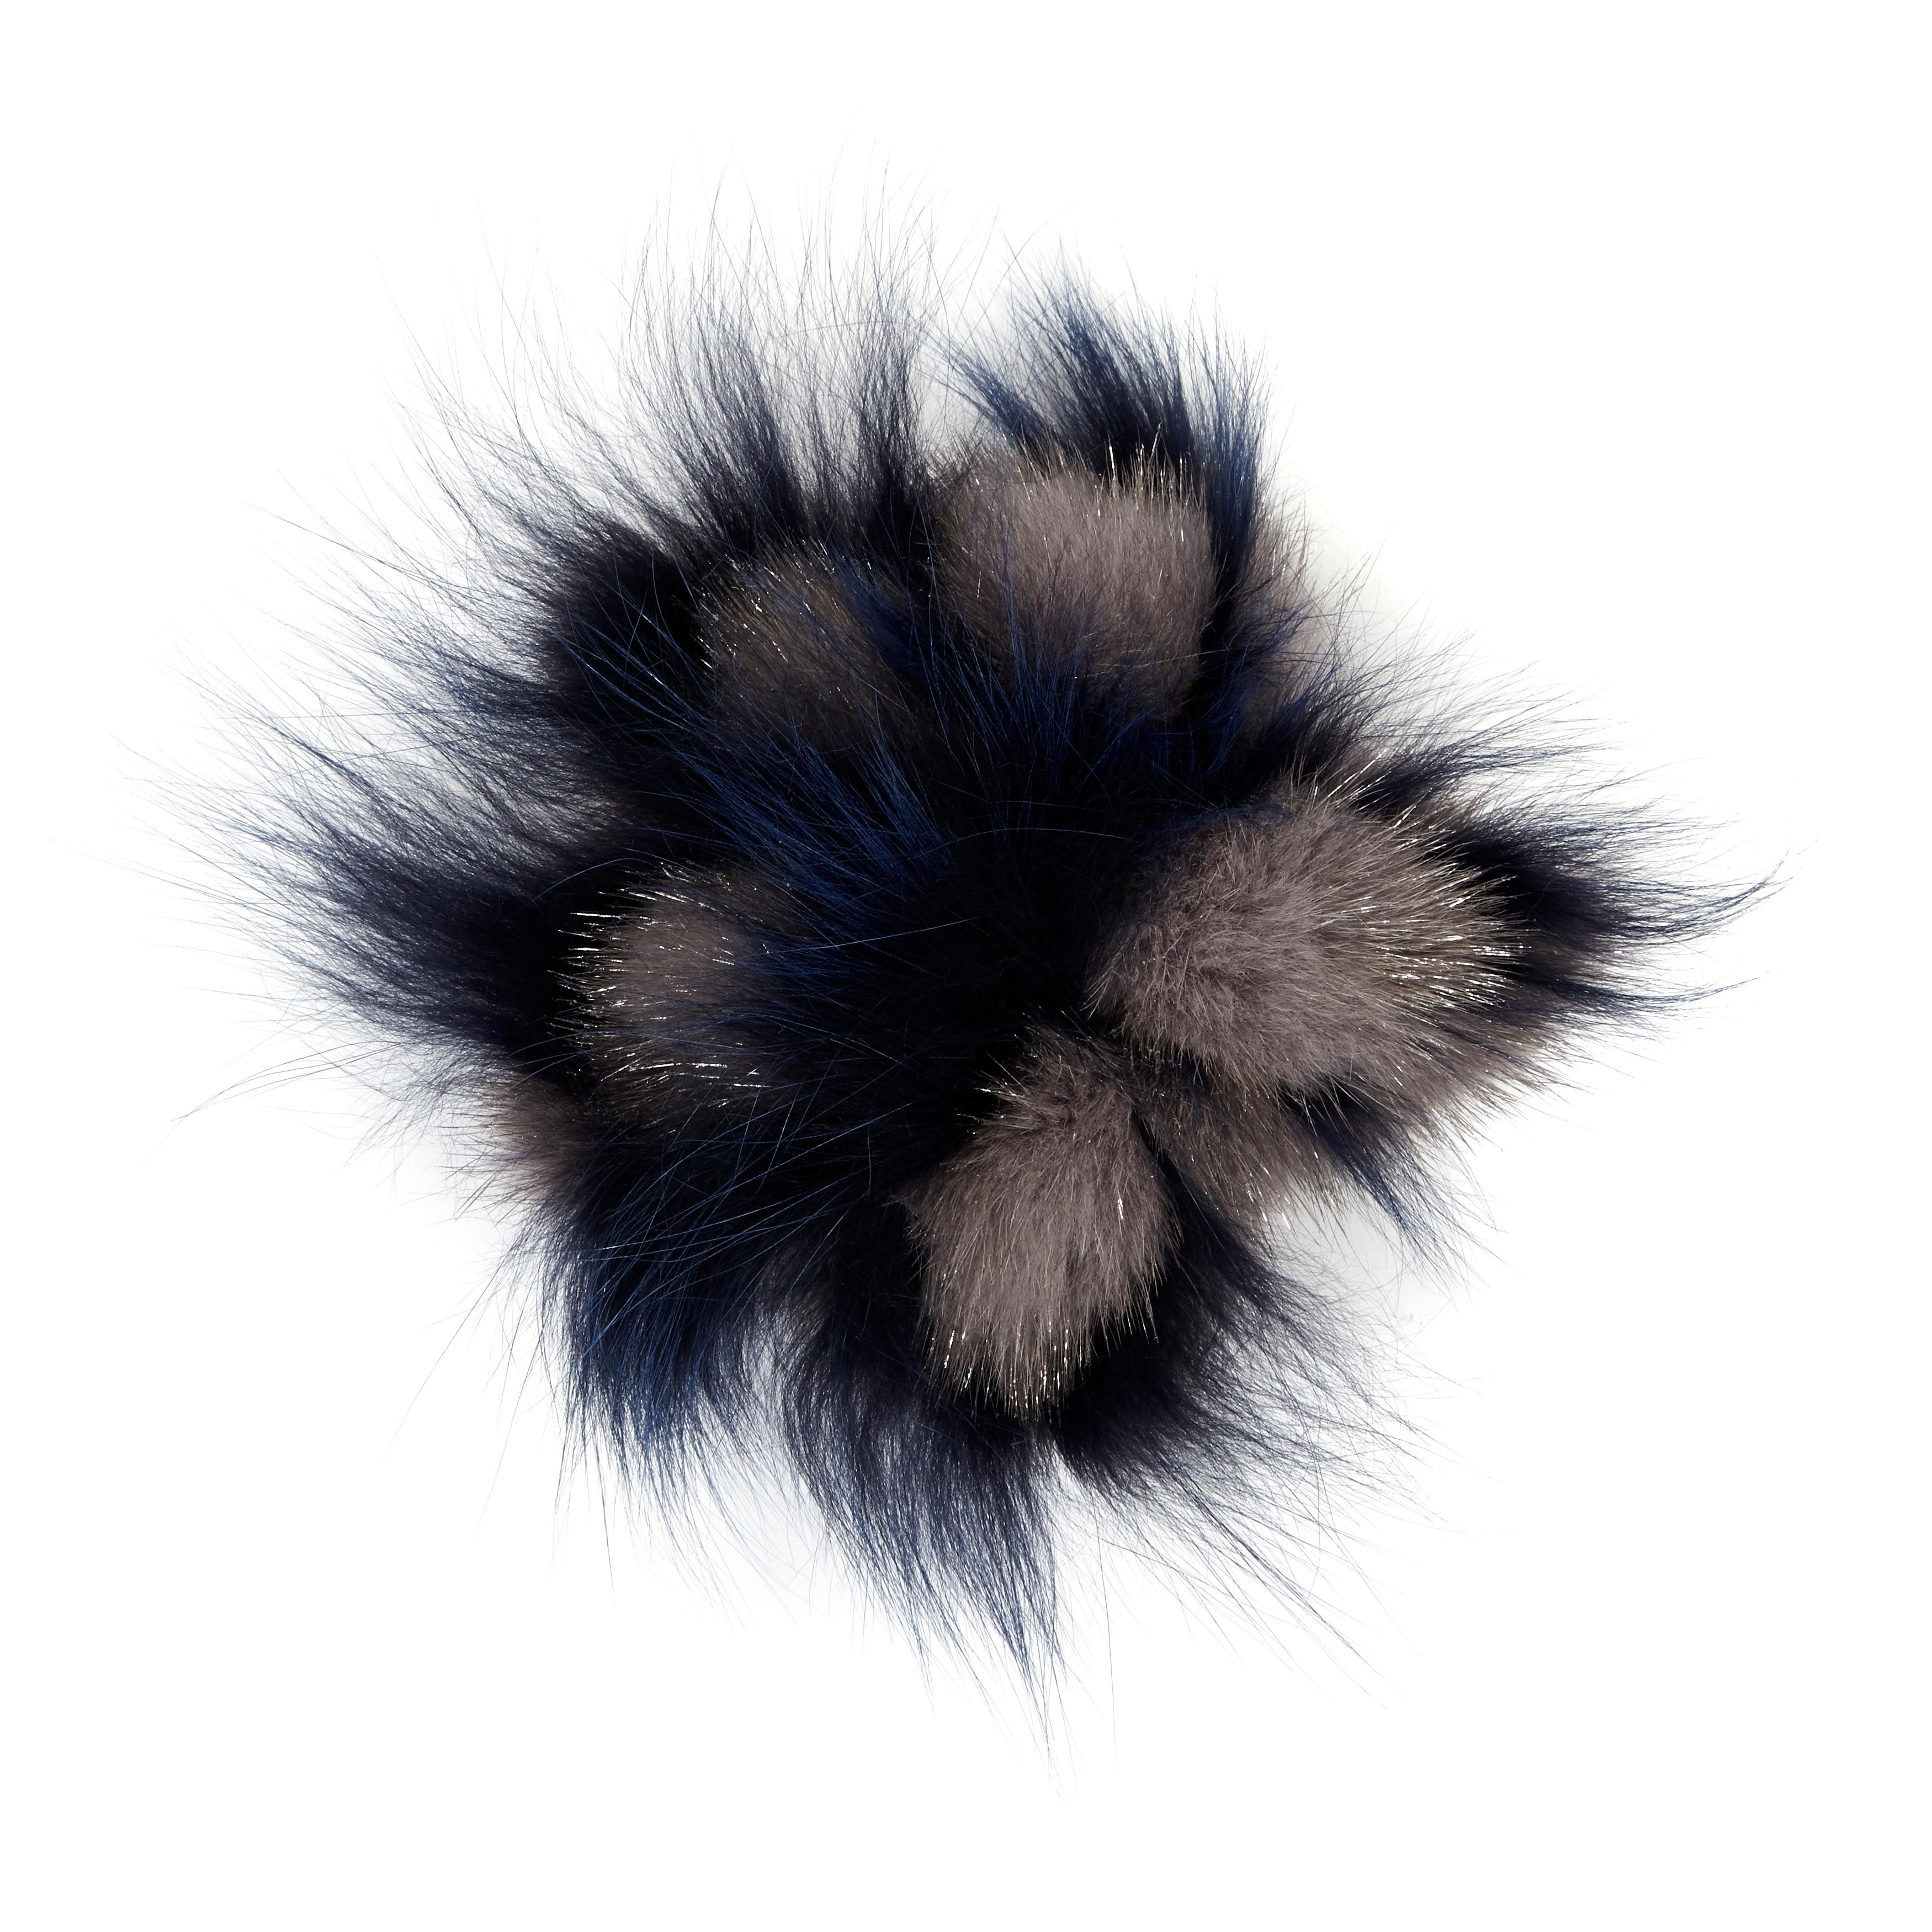 The perfect valentines gift, this Verheyen London mink fur flower brooch is designed to add a glimmer of warmth and fun to your look.  Wear on your favourite winter knit or over a cape for glamour.

PRODUCT DETAILS

Colour: Dark Grey Platinum and